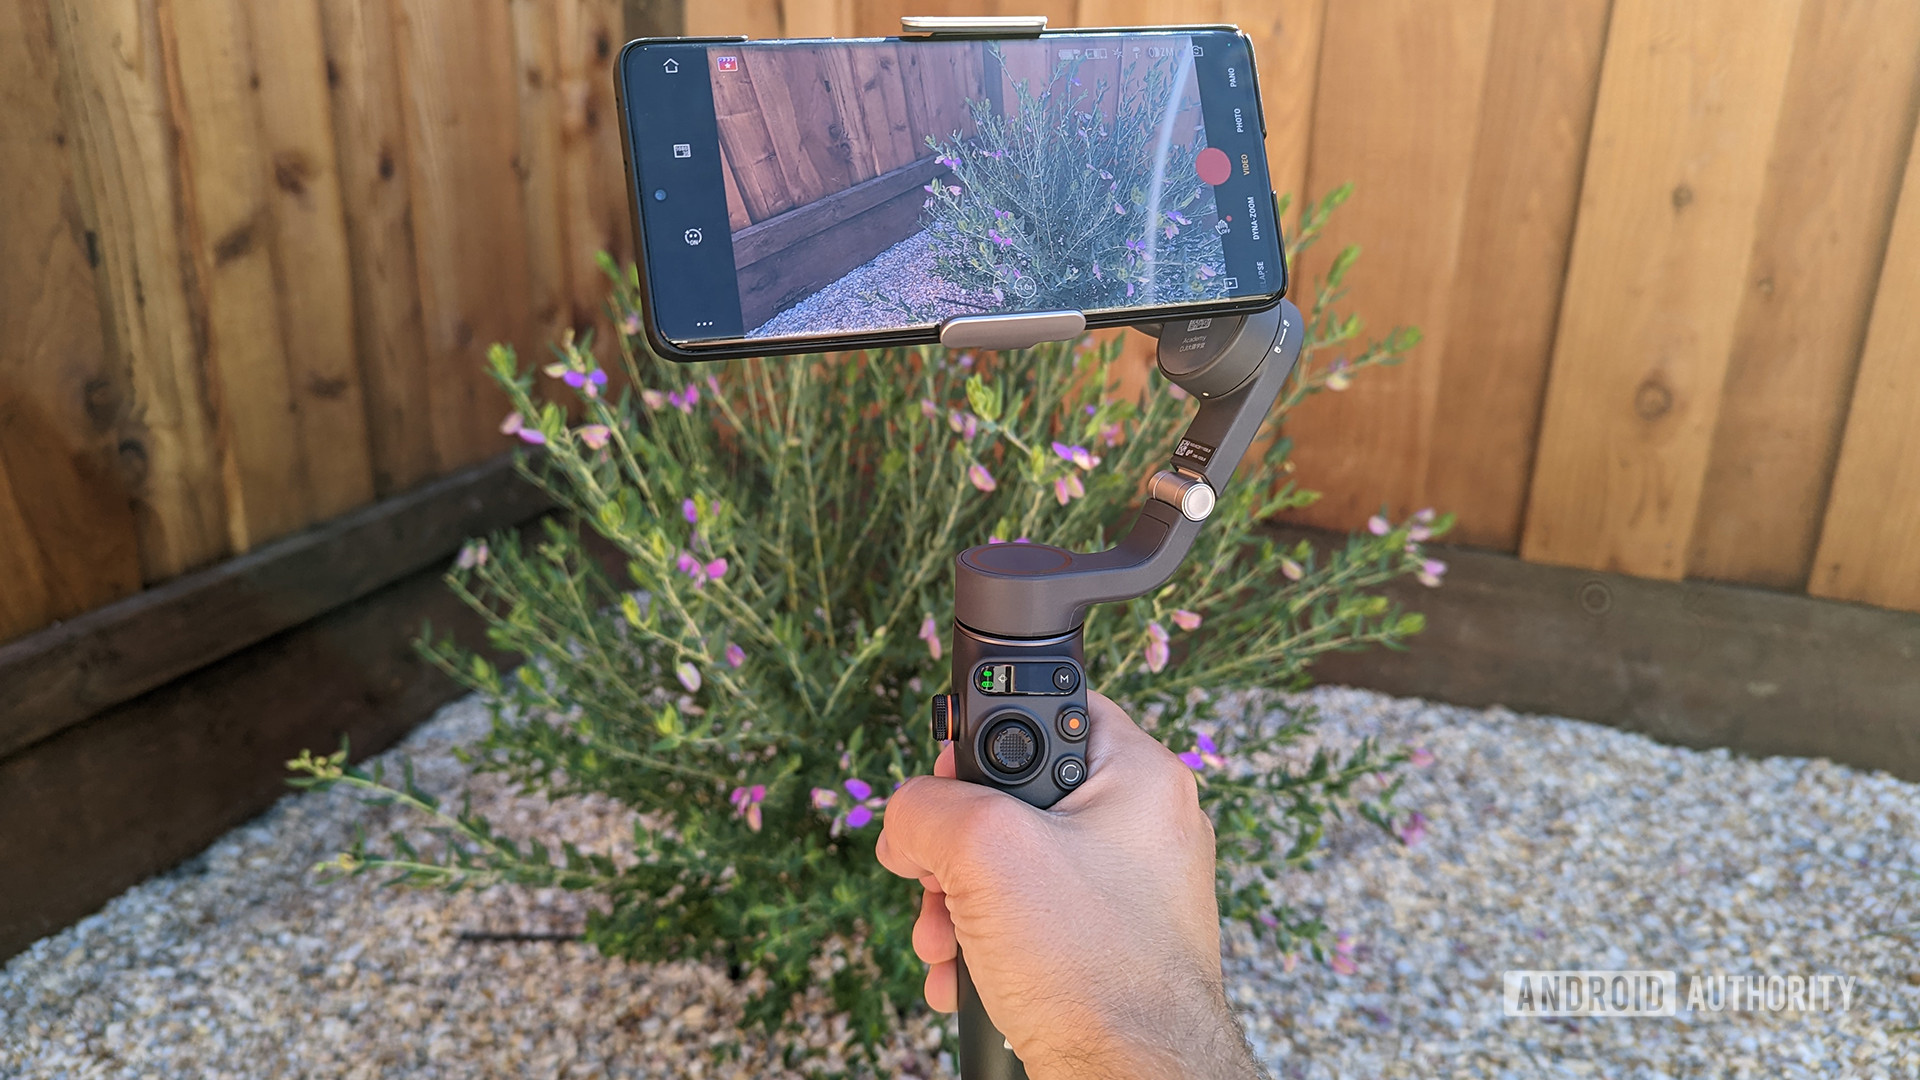 DJI Osmo Mobile 6 Review looking at some flowers